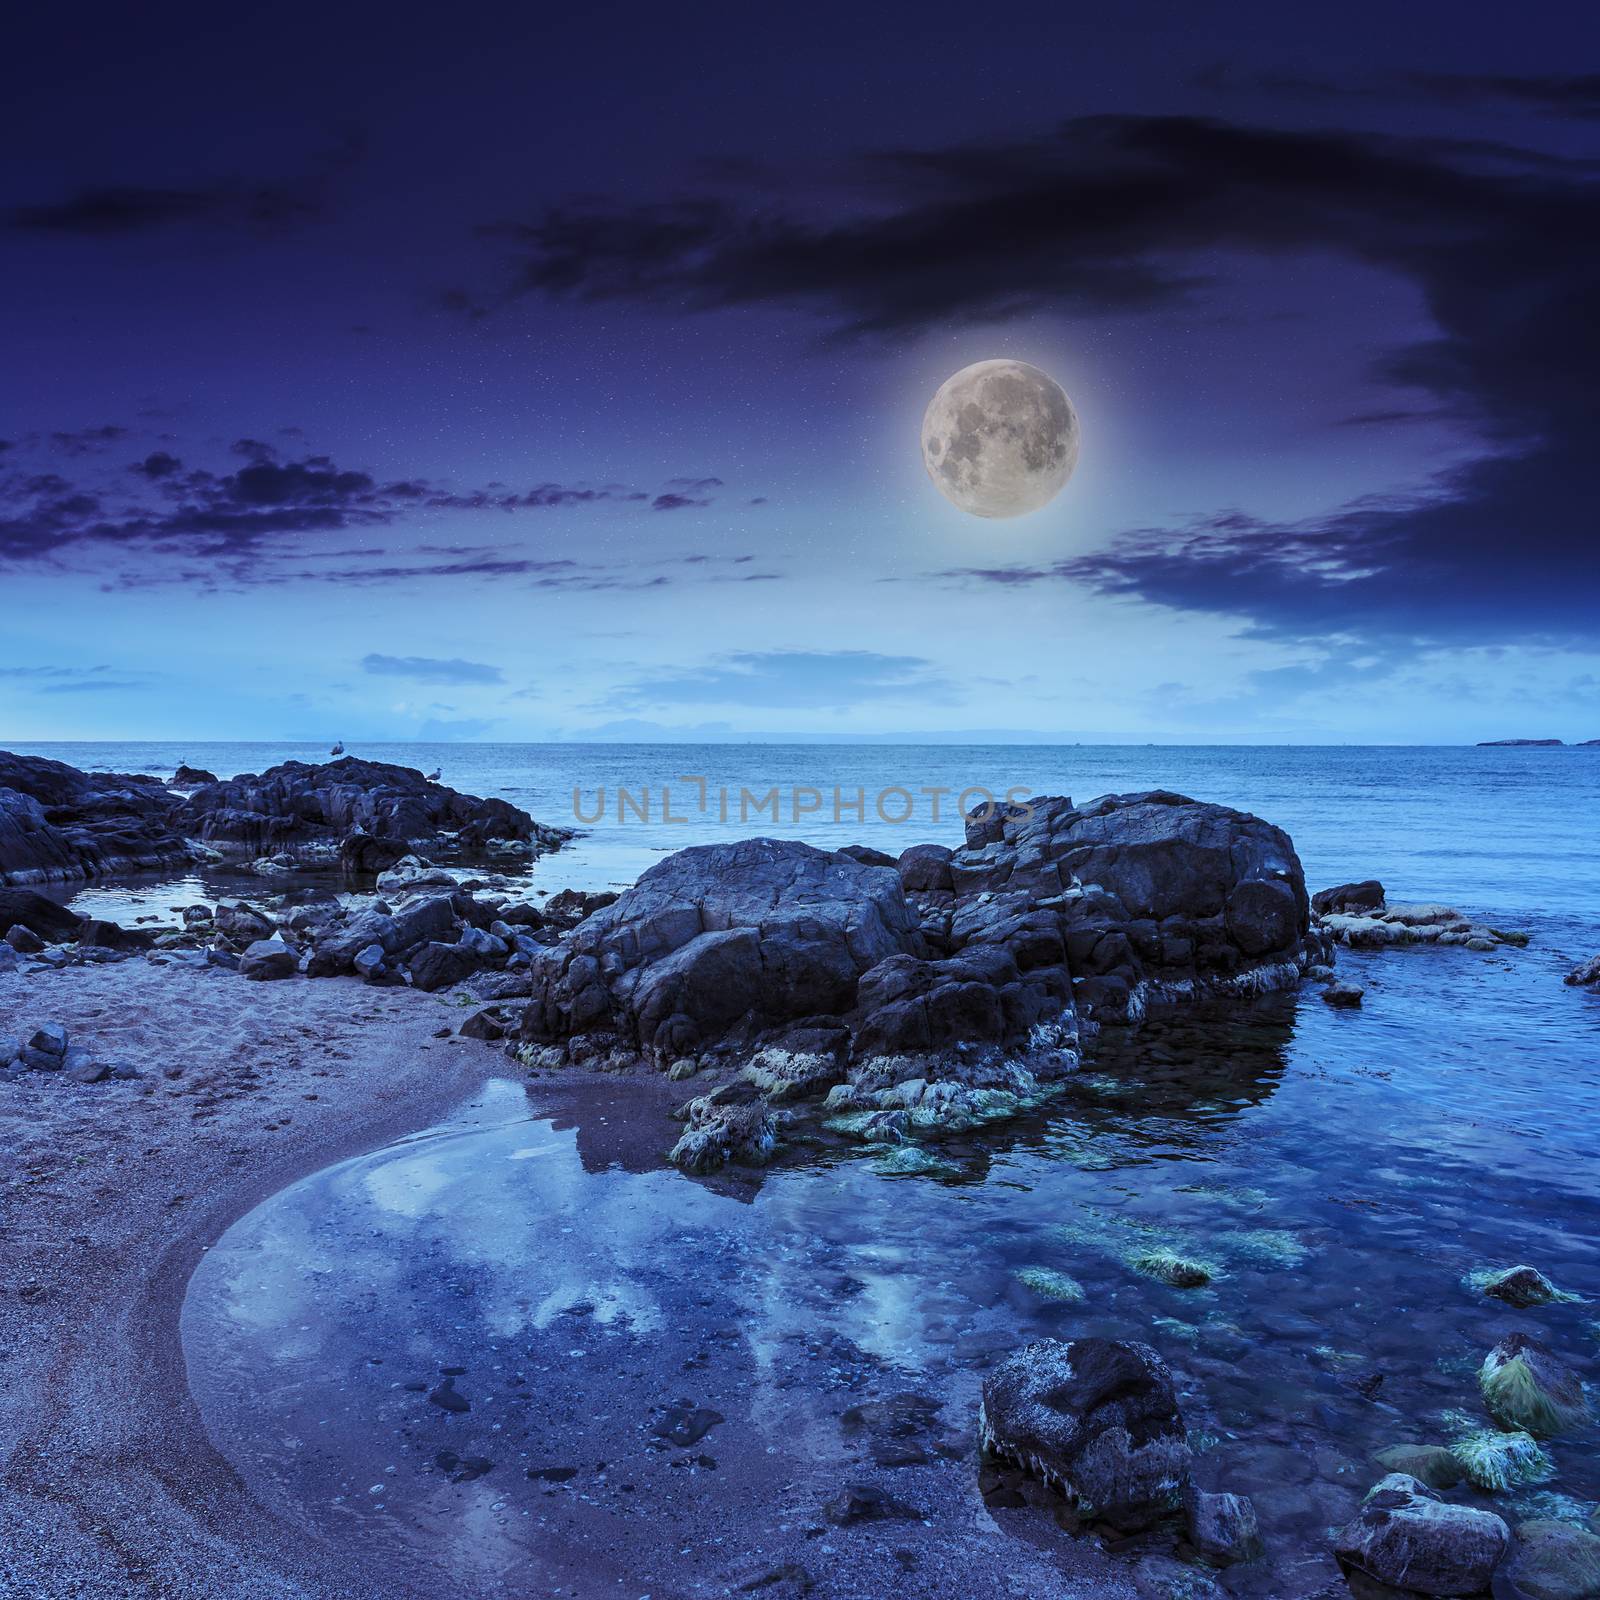 sea shore landscape with boulders at night by Pellinni